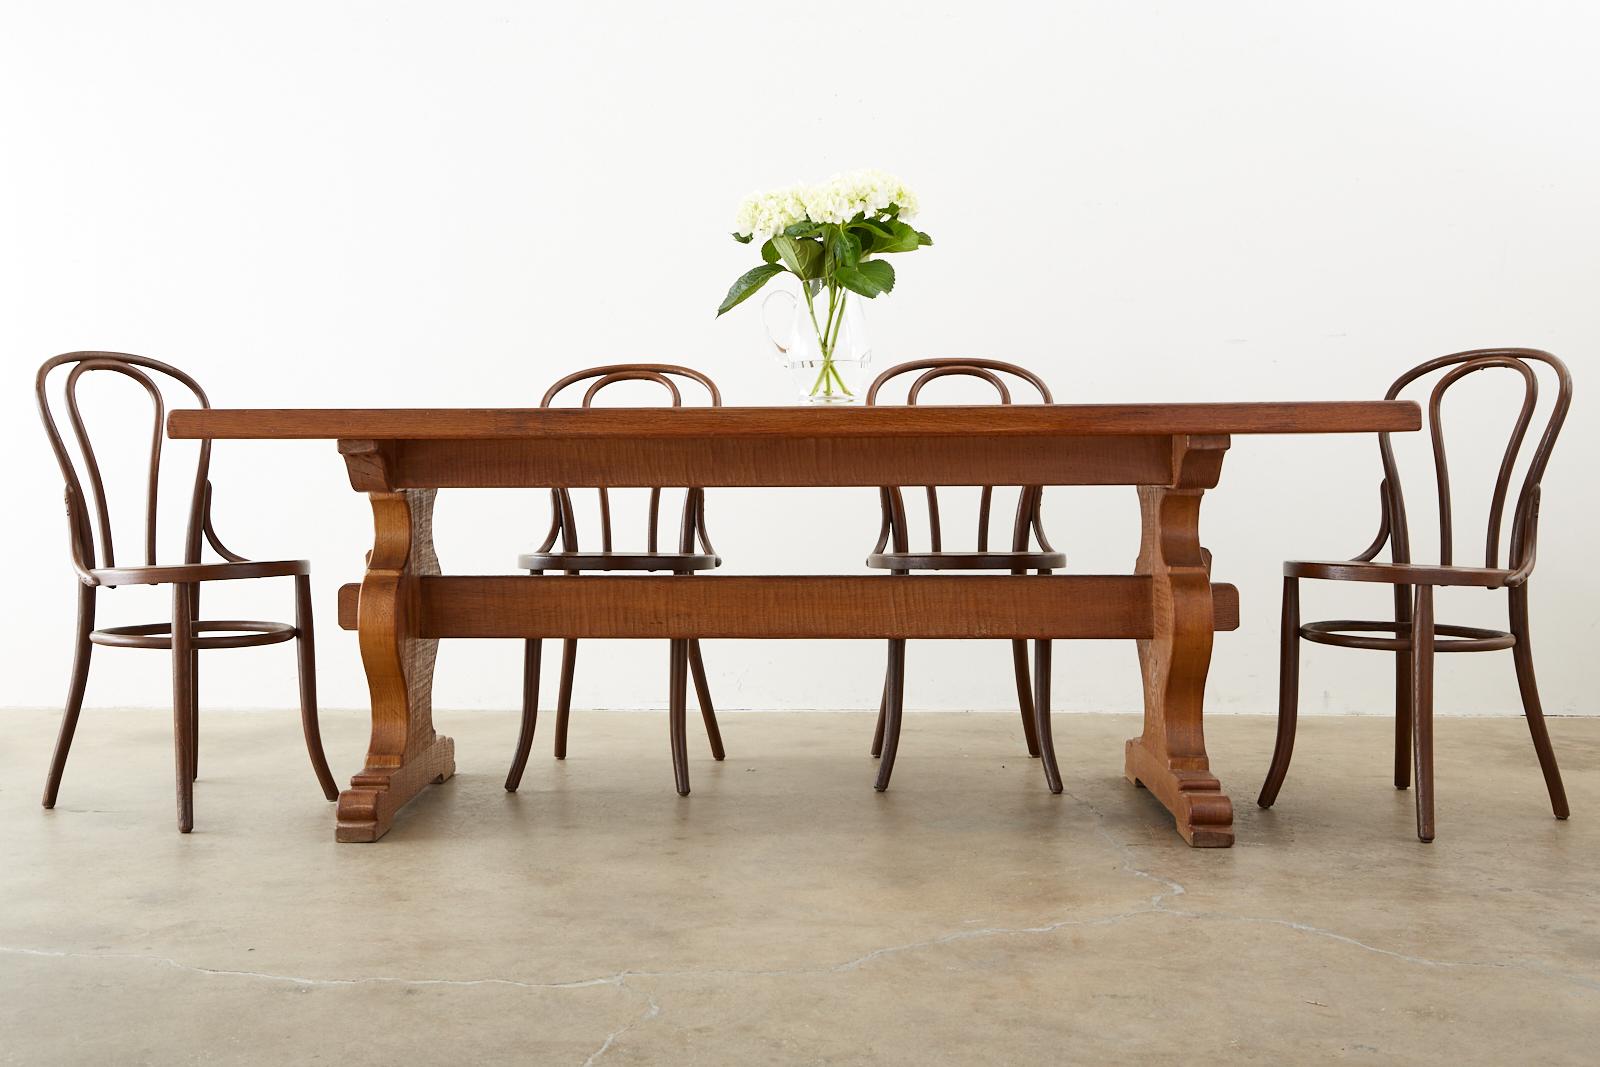 Rustic country French farmhouse trestle dining table constructed from oak. The table features a 2 inch thick solid oak top supported by beautifully shaped trestle legs ending with shoe feet. The legs are conjoined by a stretcher having an exposed